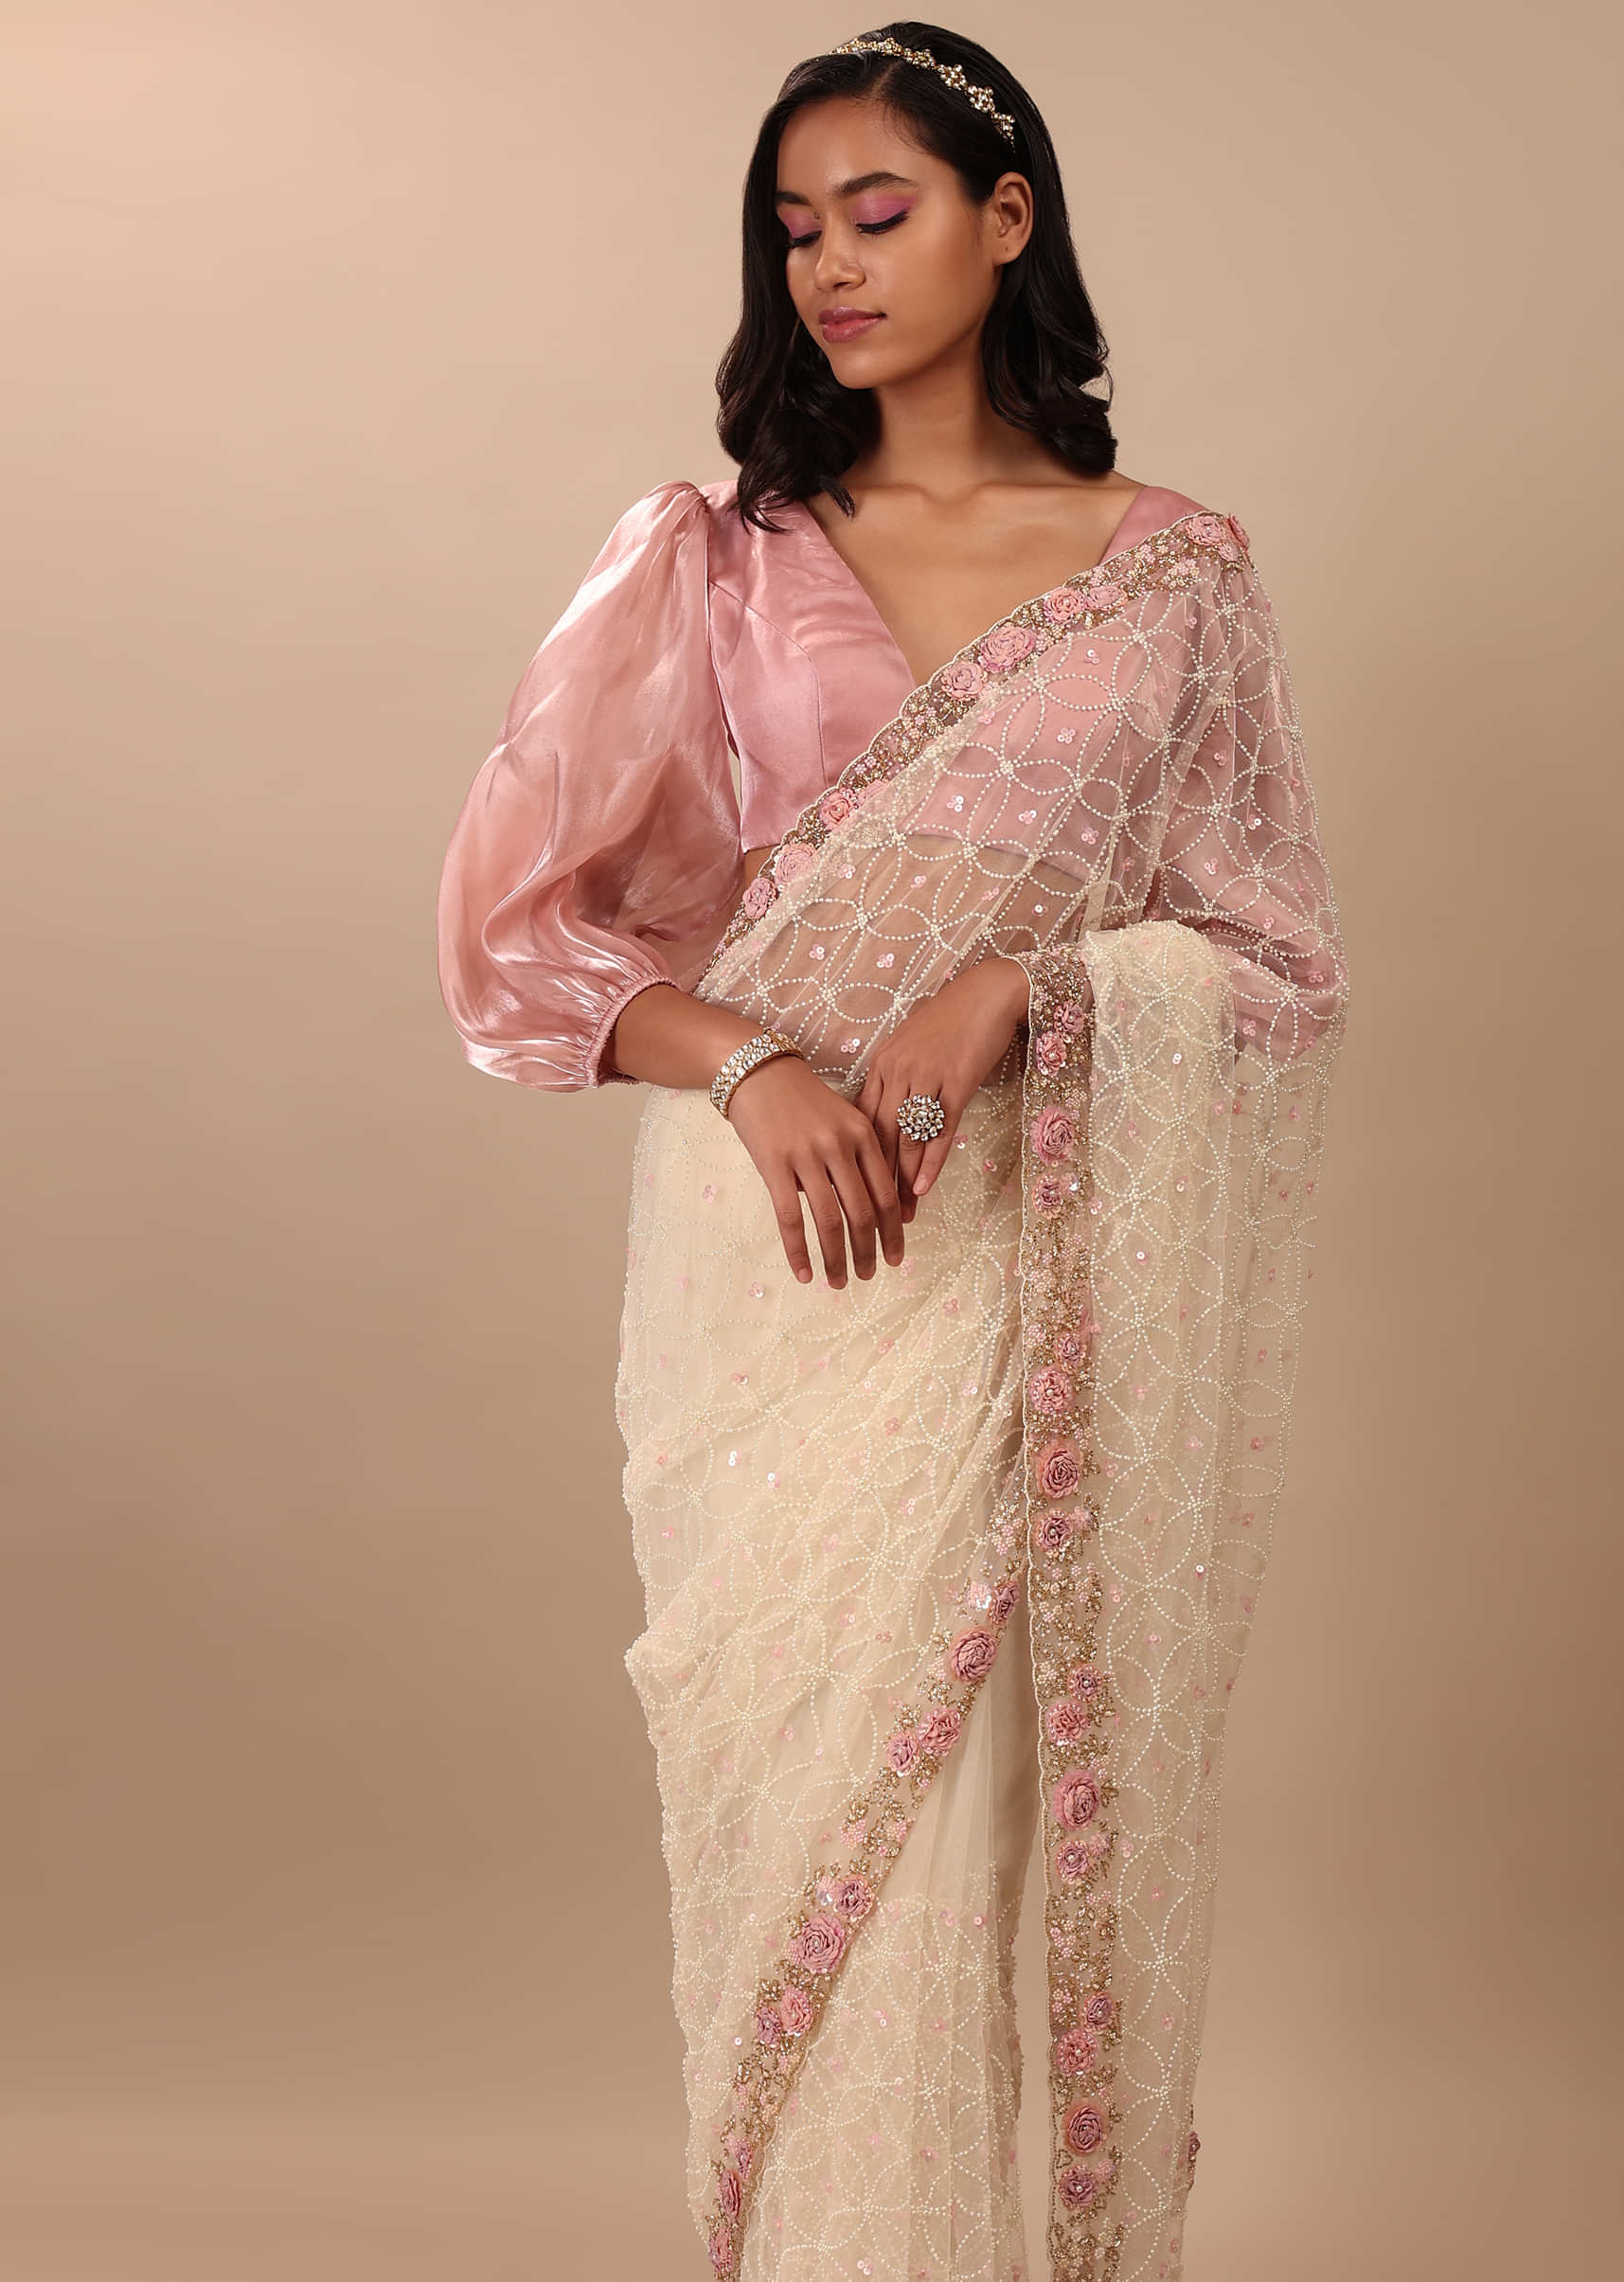 Pearl White Saree Fully Embroidered In Net Fabric